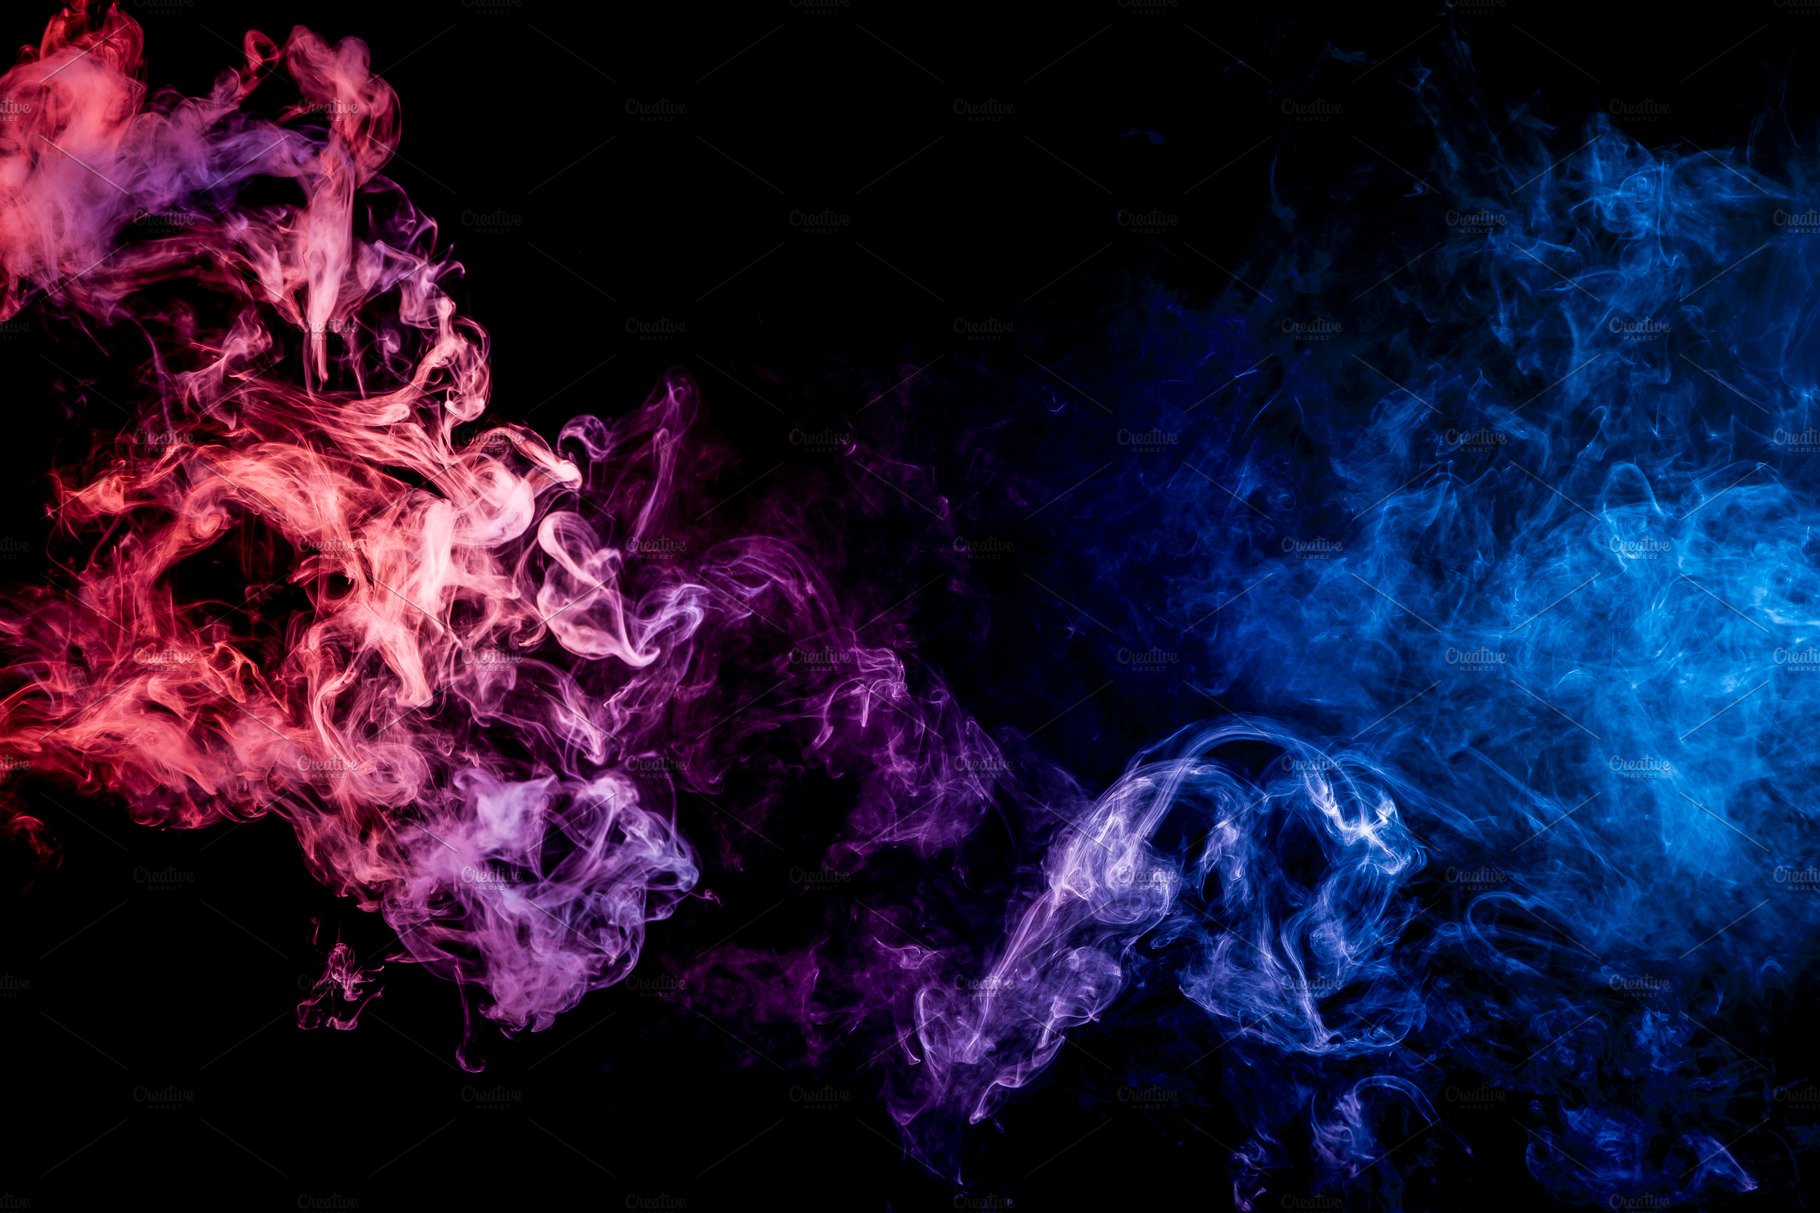 Vaping Backgrounds